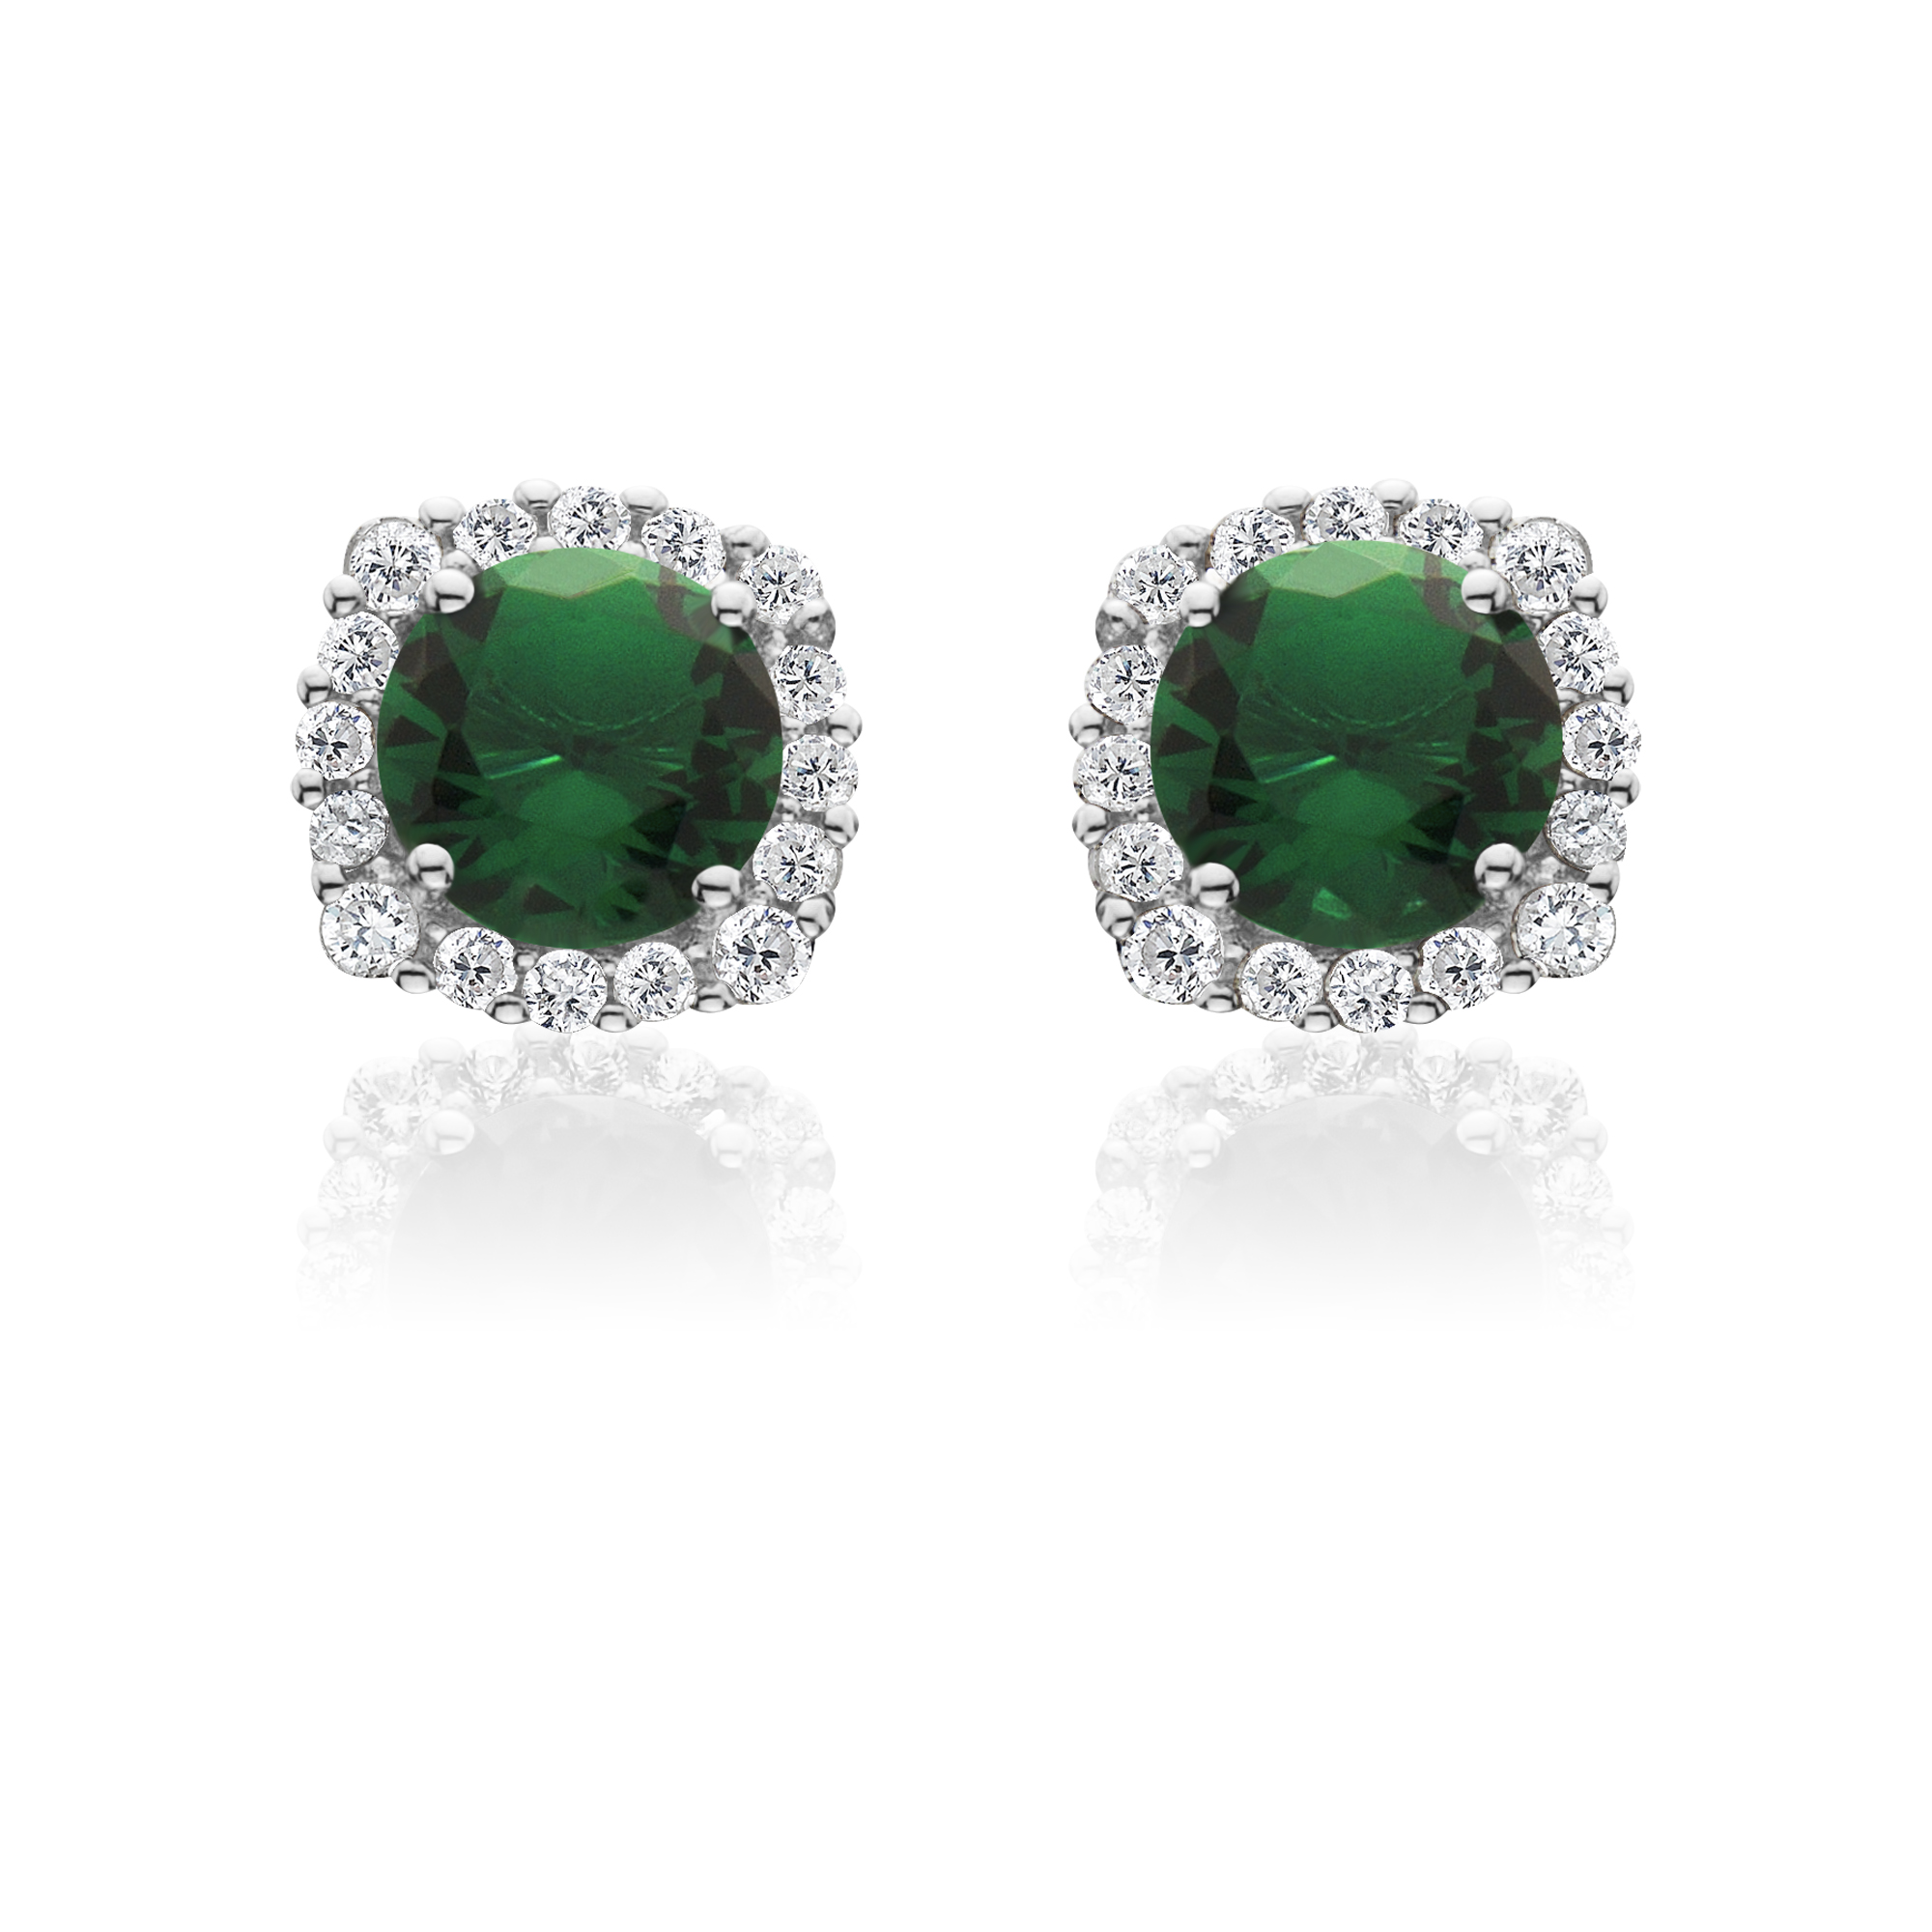 Sterling Silver Halo Style Round Cut Simulated Emerald  Earrings